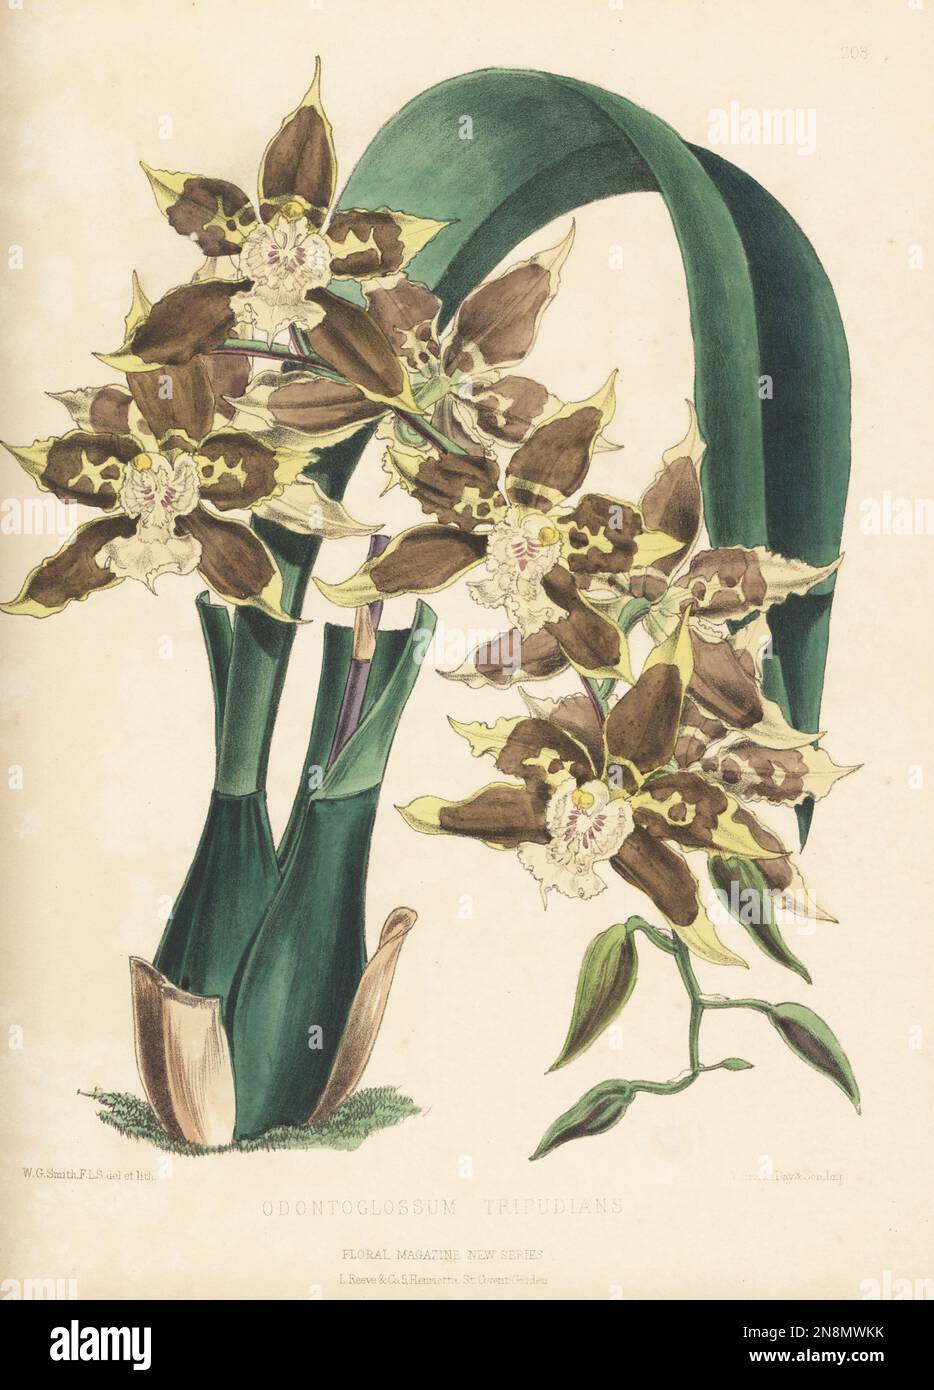 Oncidium tripudians orchid, native to Colombia. As Odontoglossum tripudians. Discovered by Polish plant hunter Josef von Warscewicz in New Grenada, sold by James Veitch and Sons nursery, King's Road, Chelsea. Handcolored botanical illustration drawn and lithographed by Worthington George Smith from Henry Honywood Dombrain's Floral Magazine, New Series, Volume 5, L. Reeve, London, 1876. Lithograph printed by Vincent Brooks, Day & Son. Stock Photo